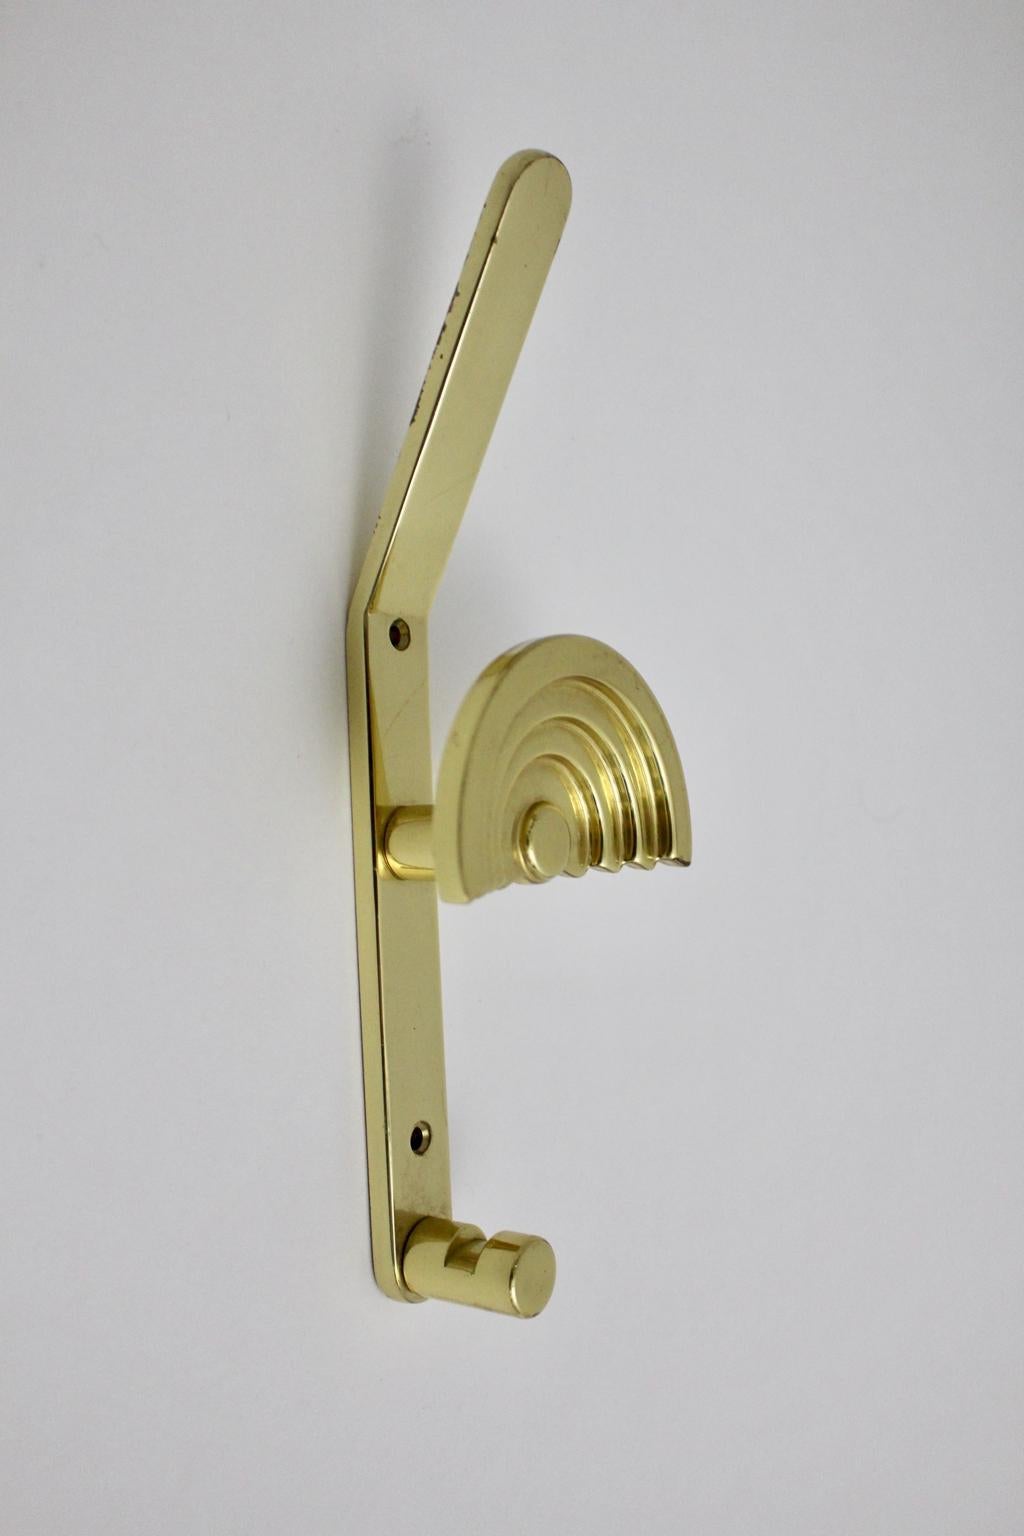 This coat hook shaped like an umbrella was designed by Ettore Sottsass Associati Italy 1985 and manufactured by Valli & Valli.
Also the wall hook was made of polished brass. Easy to fix it on the wall with two screws.
Very good vintage condition